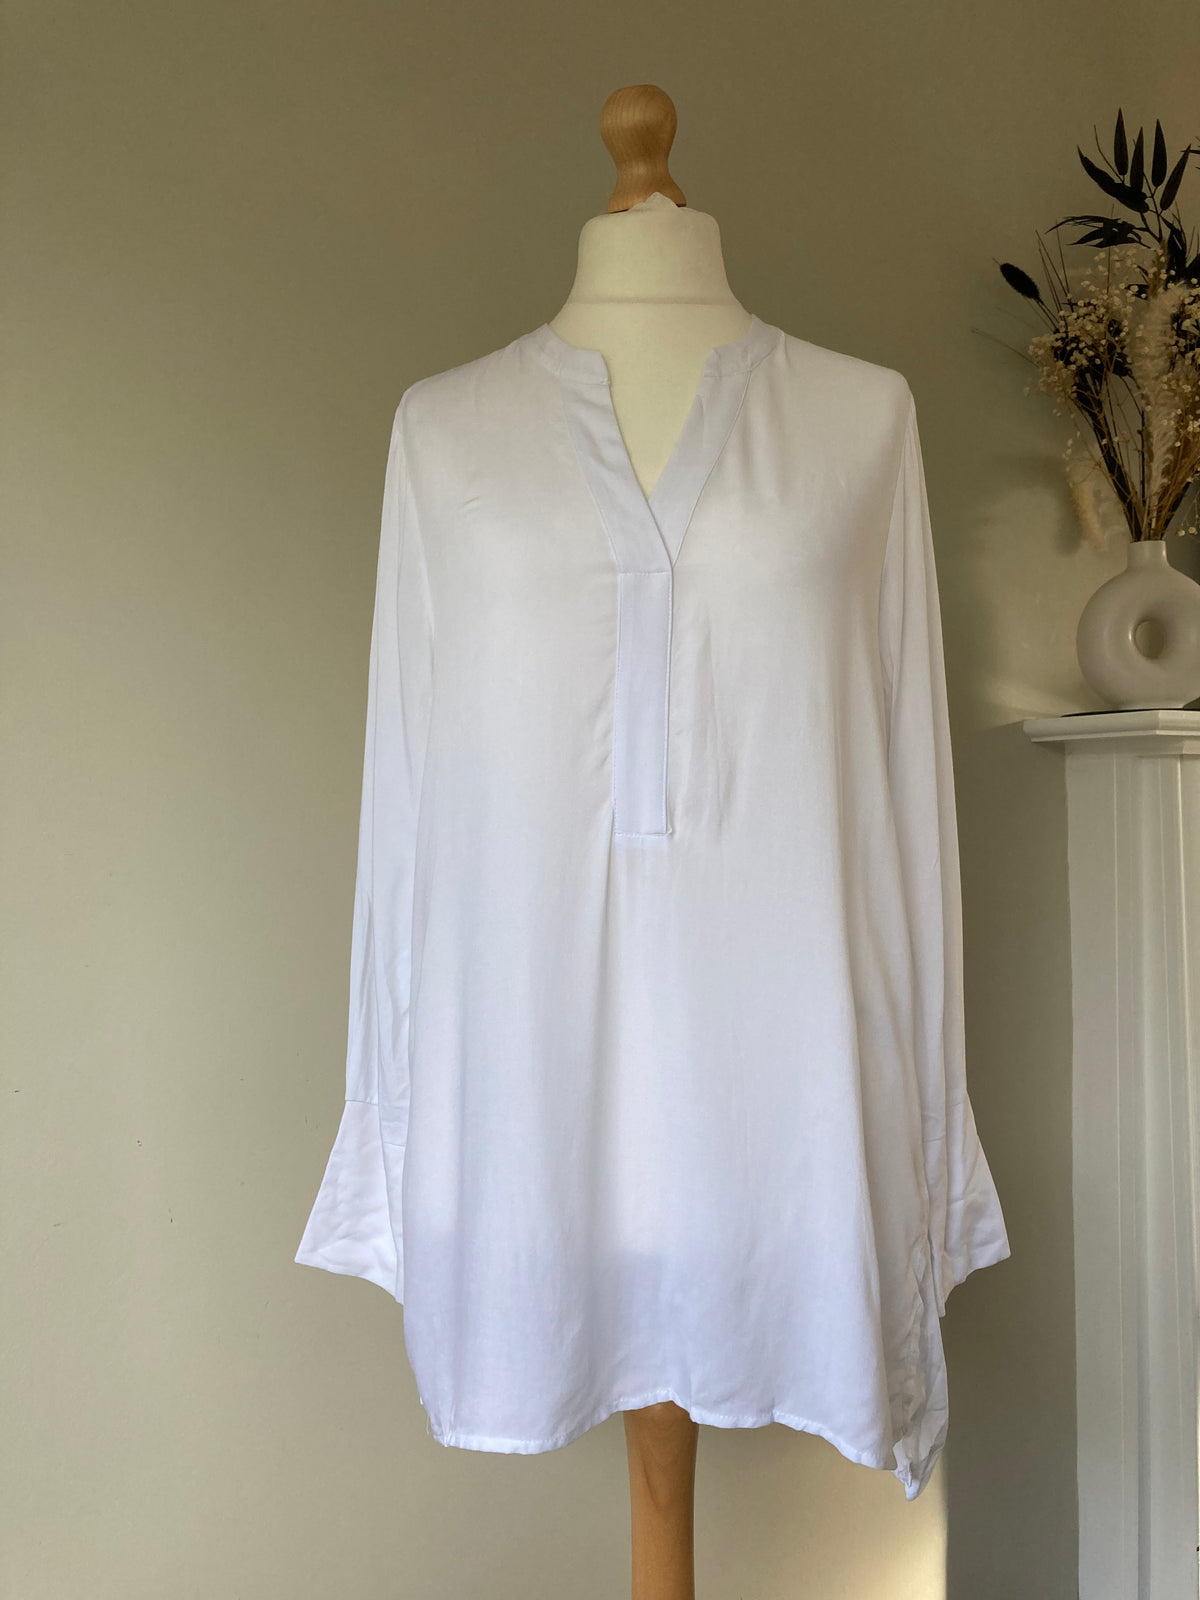 Long White  blouse with extra-long cuffs by ANISTON- Size 14